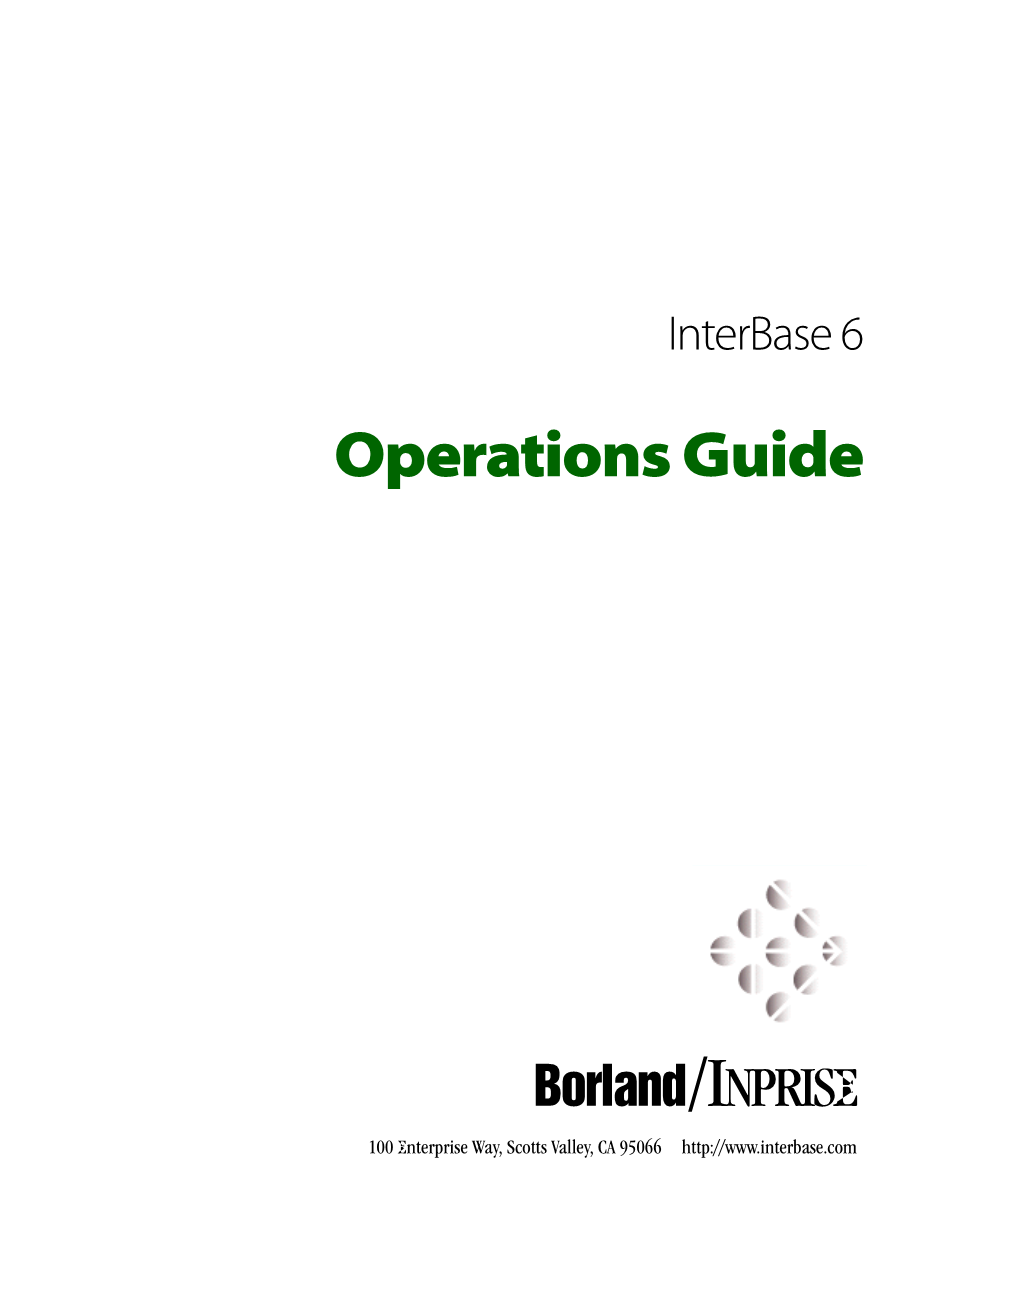 Interbase 6 Operations Guide 31 Chapter 1 Introduction